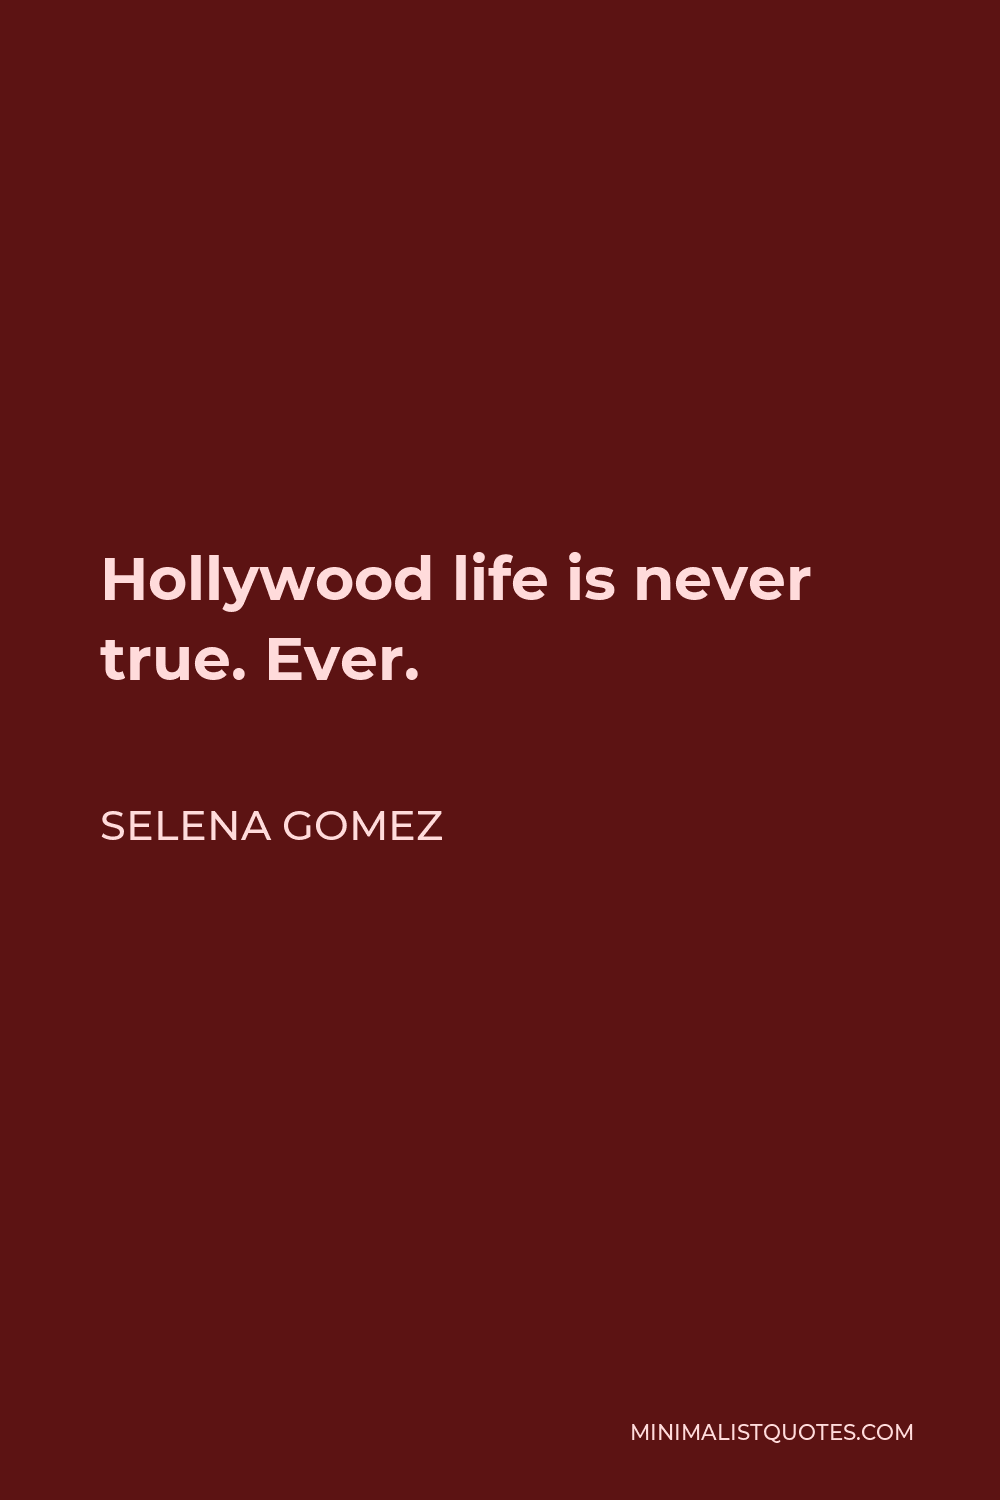 Selena Gomez Quote - Hollywood life is never true. Ever.